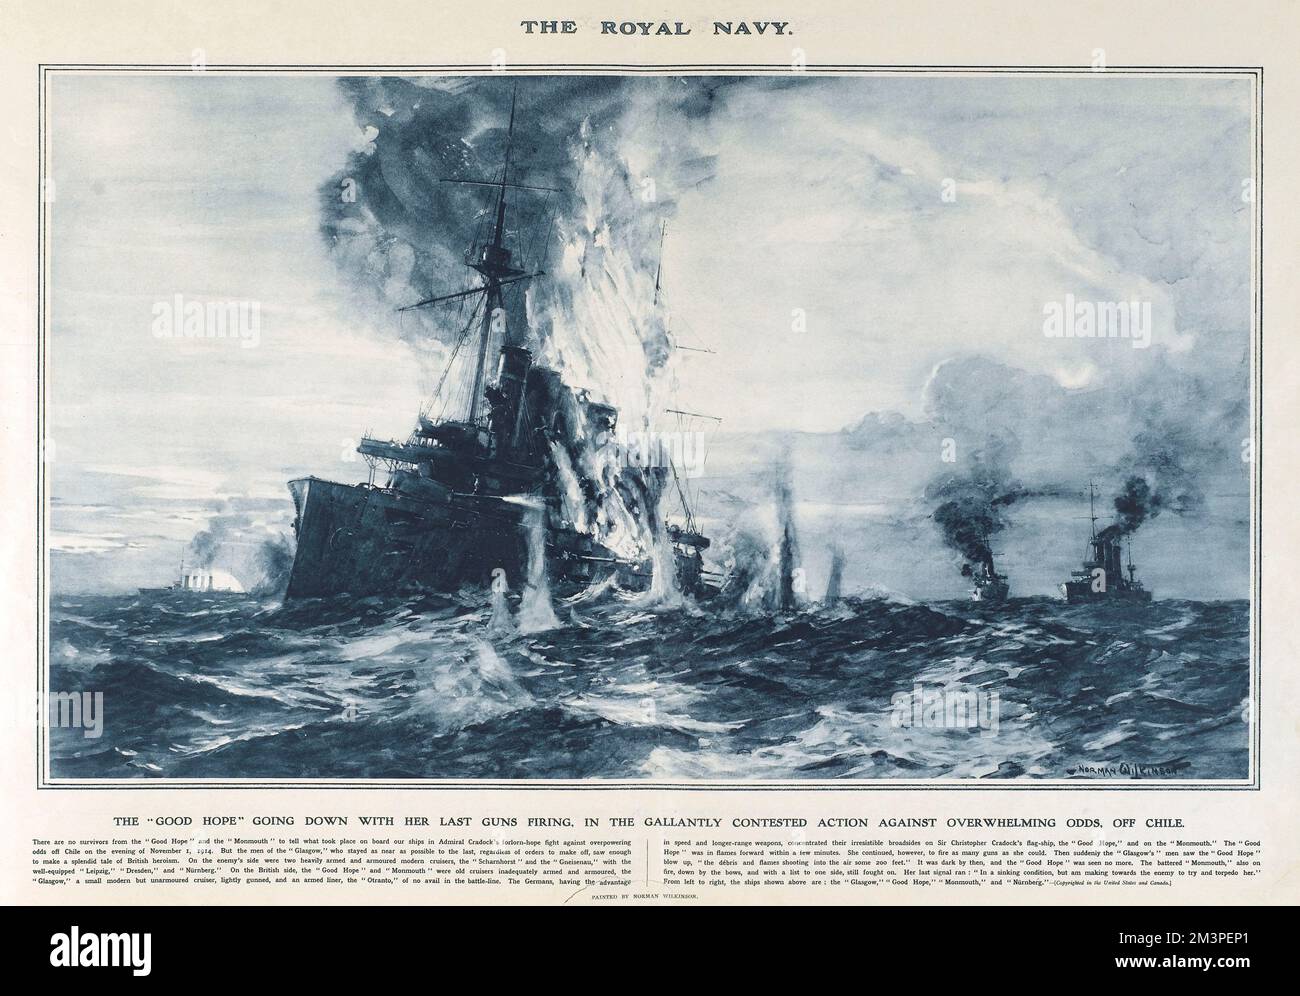 HMS Good Hope of the British Royal Navy going down with her last guns firing, in an action against overwhelming odds off the coast of Chile, South America.  Reproduction of a painting by Norman Wilkinson in Great War Deeds, a special panorama supplement produced by the Illustrated London News in 1915, featuring heroic actions of the First World War.      Date: 1914 Stock Photo